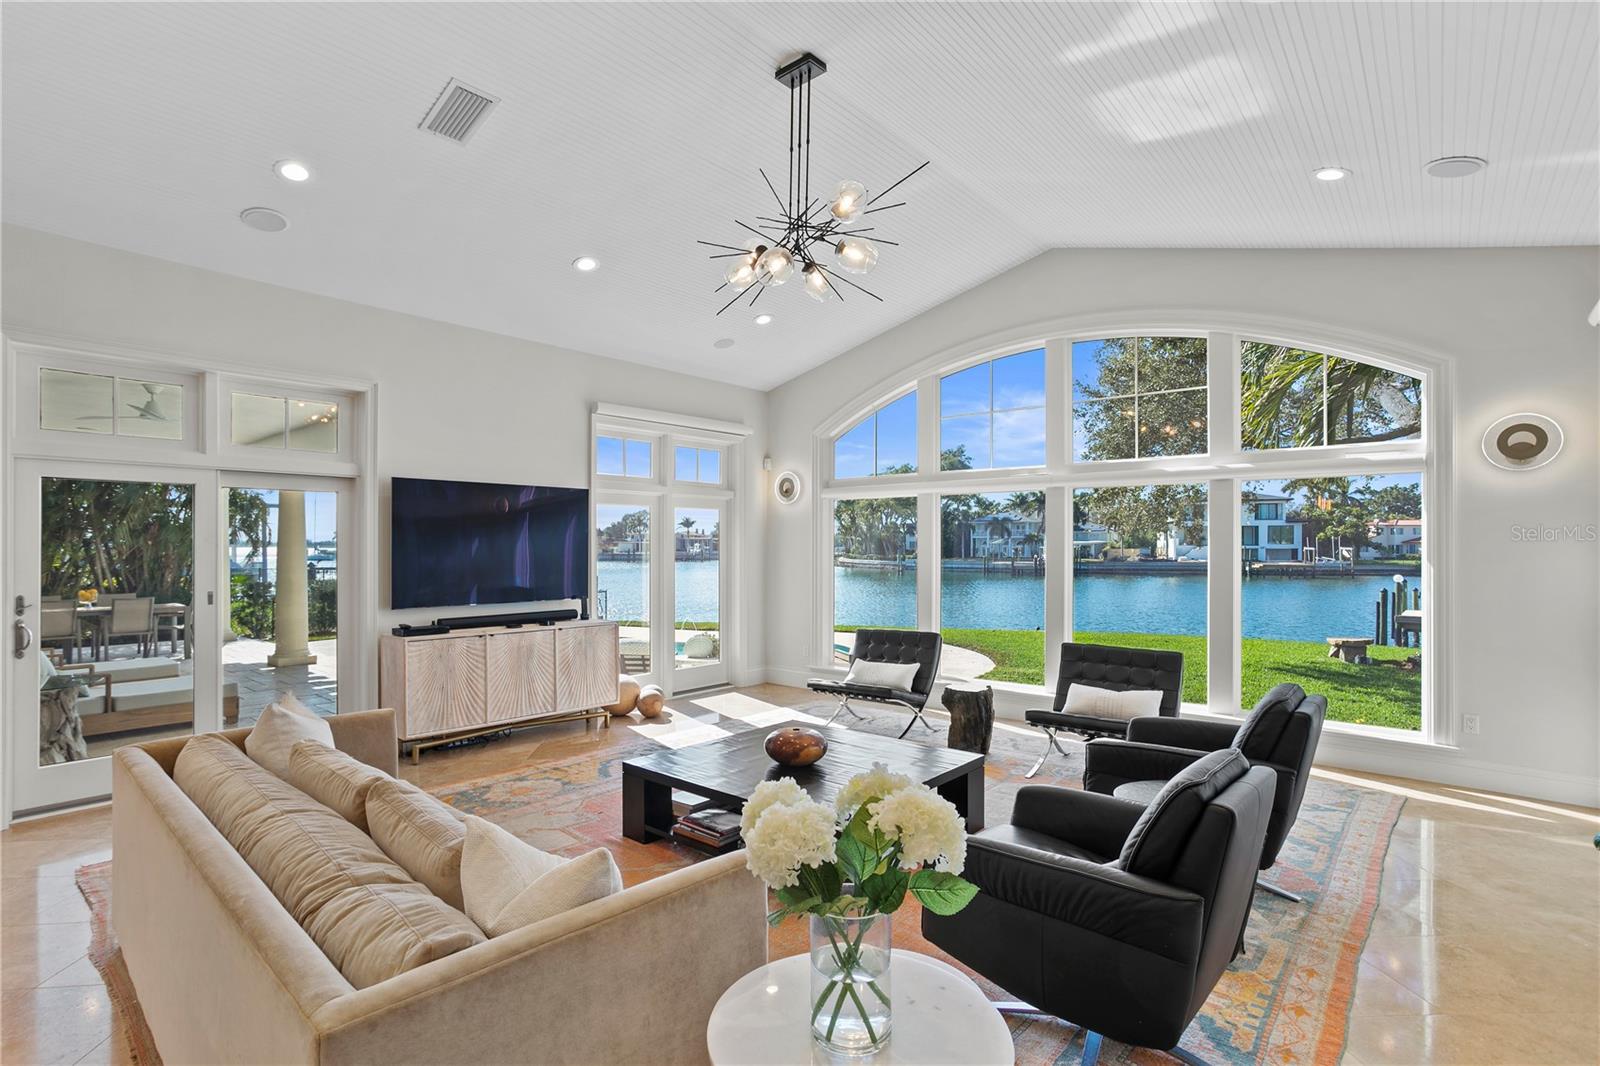 The open family room is a perfect place to gather.